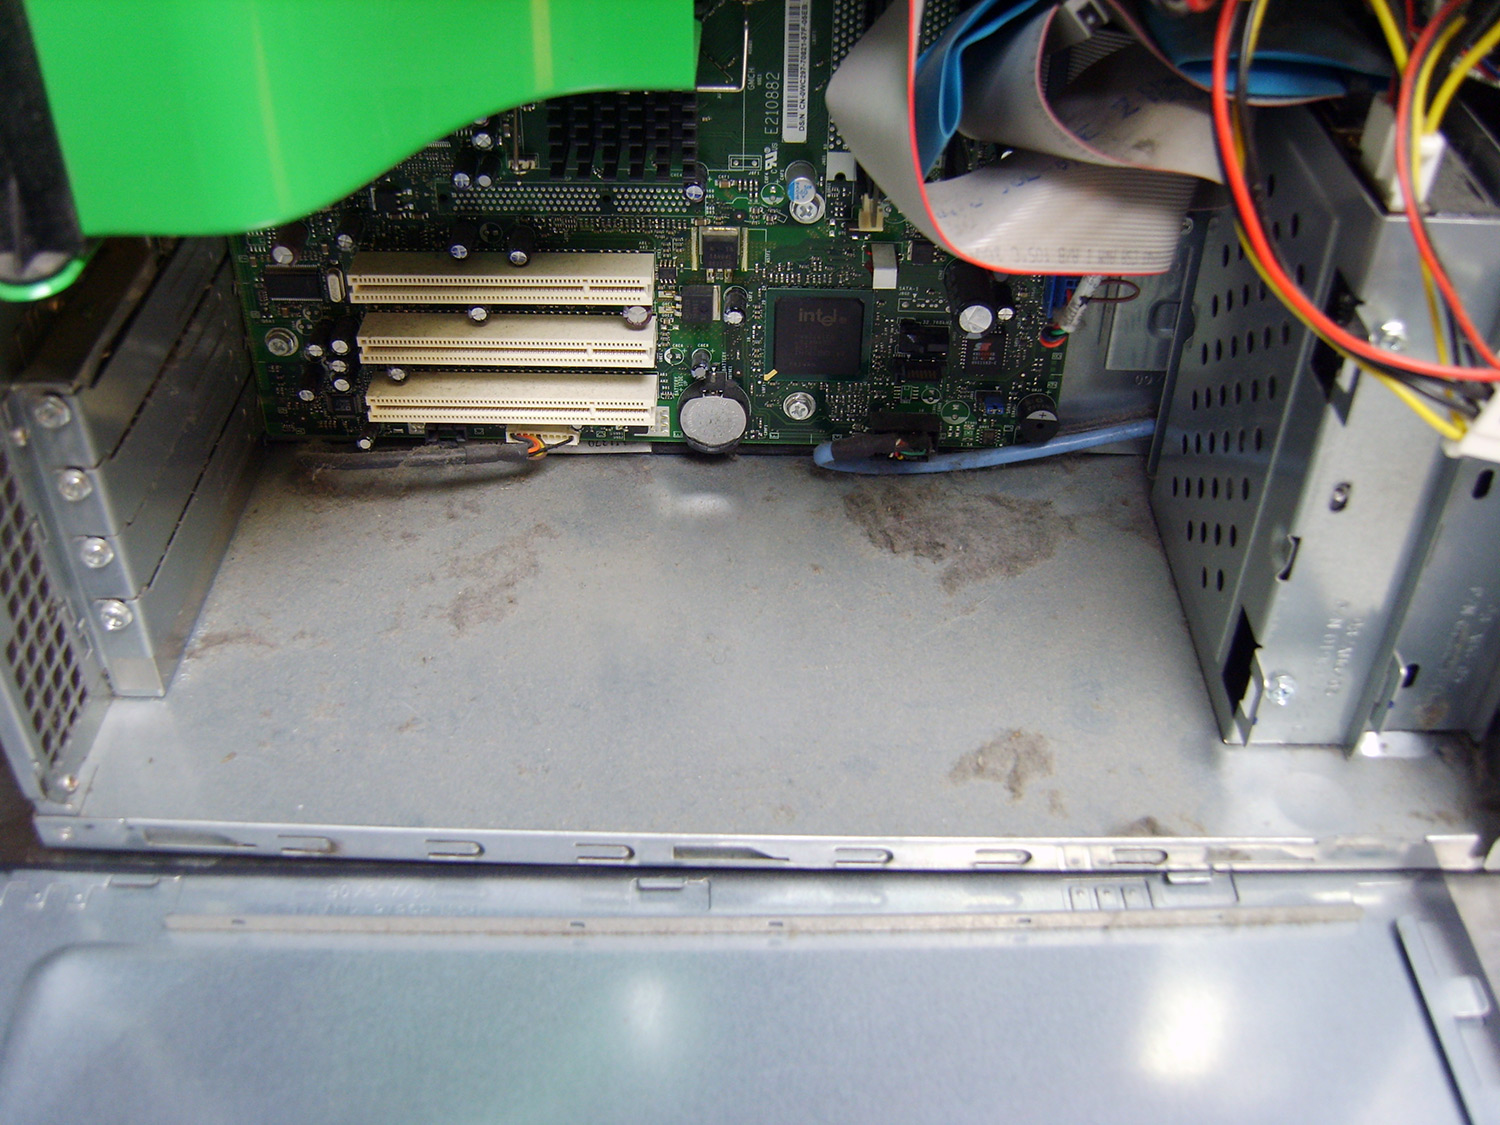 Dirty wiring and electronic components inside an open computer tower